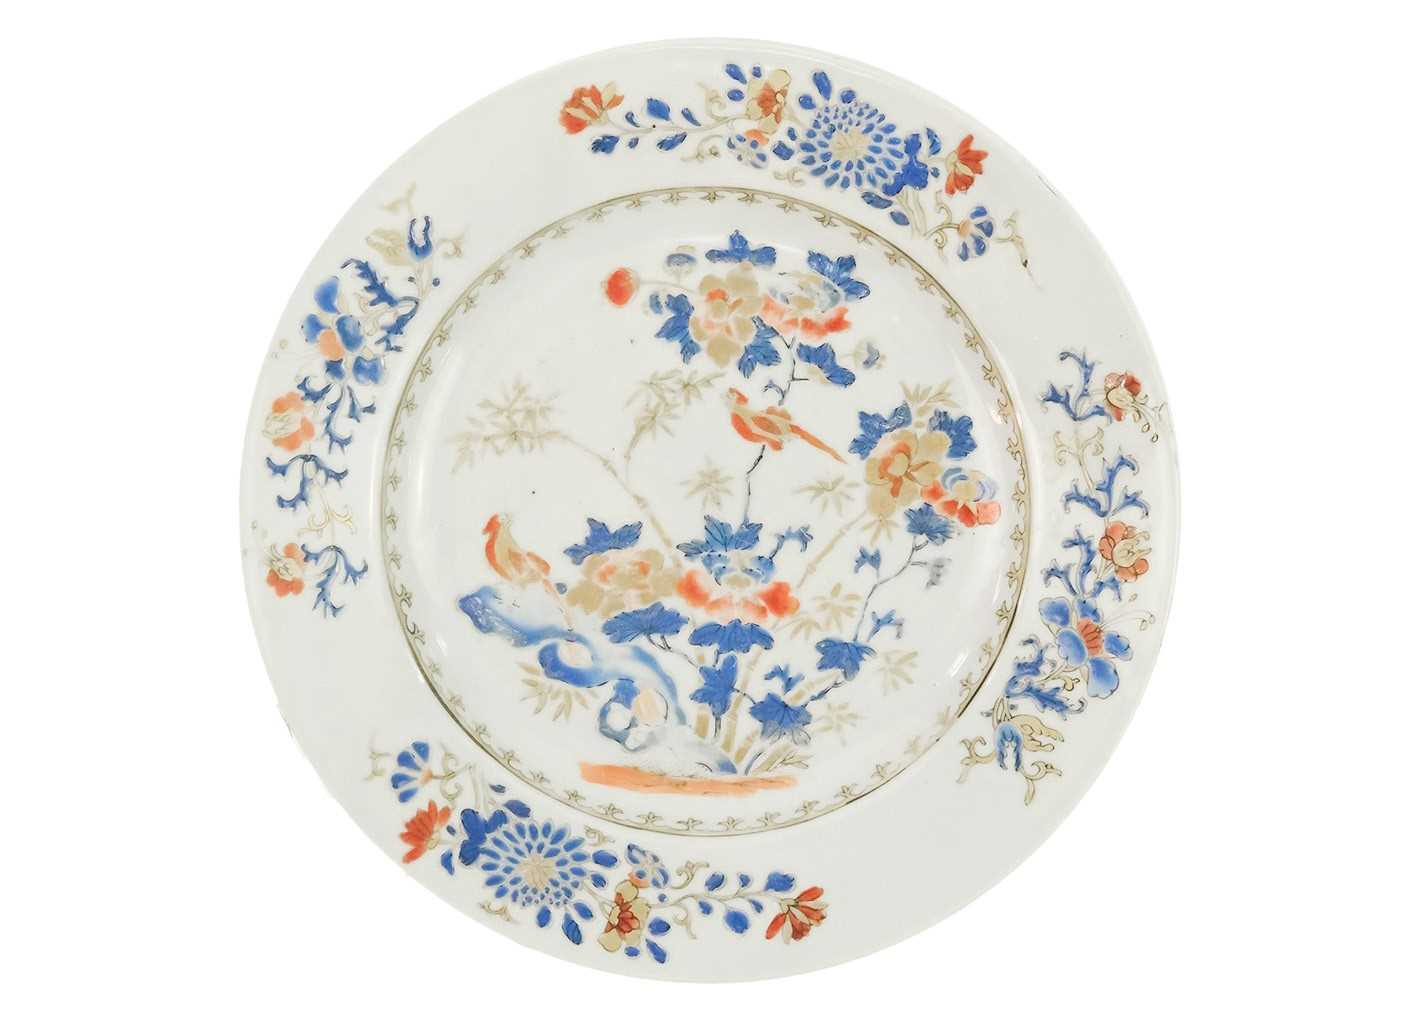 A pair of Chinese export porcelain plates, 18th century. - Image 4 of 6